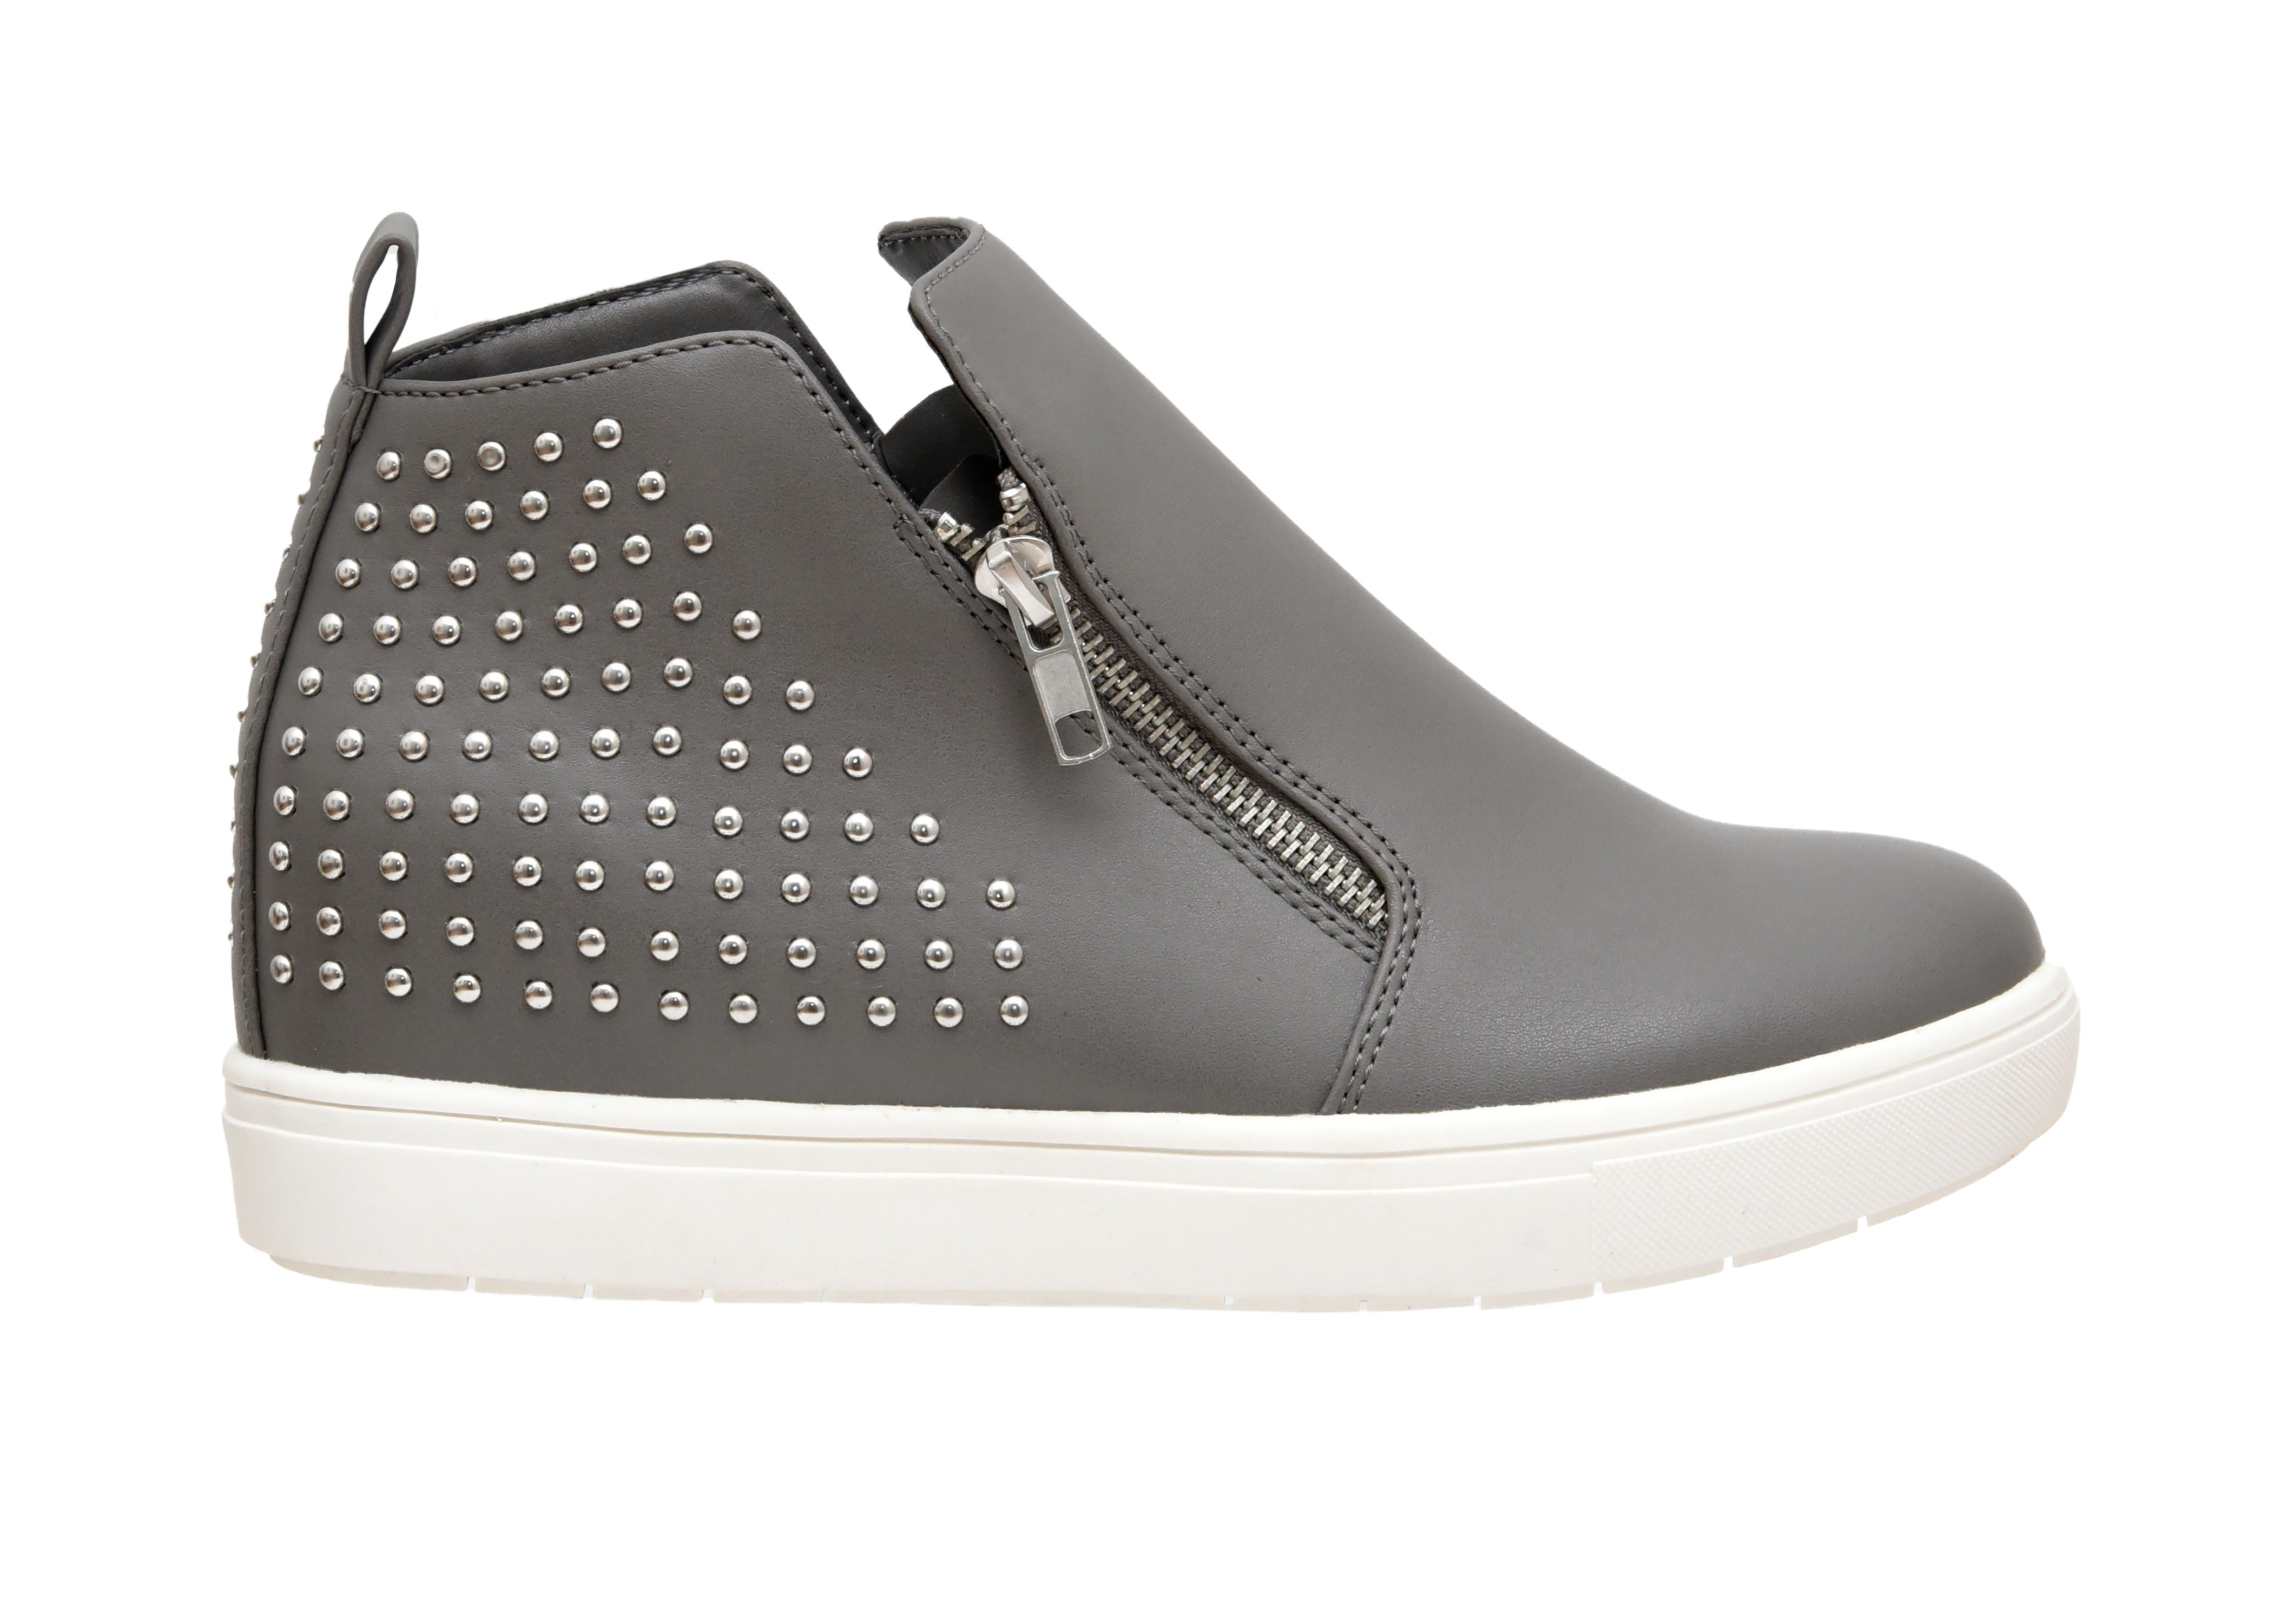 Hollywood Studded Wedge Sneaker